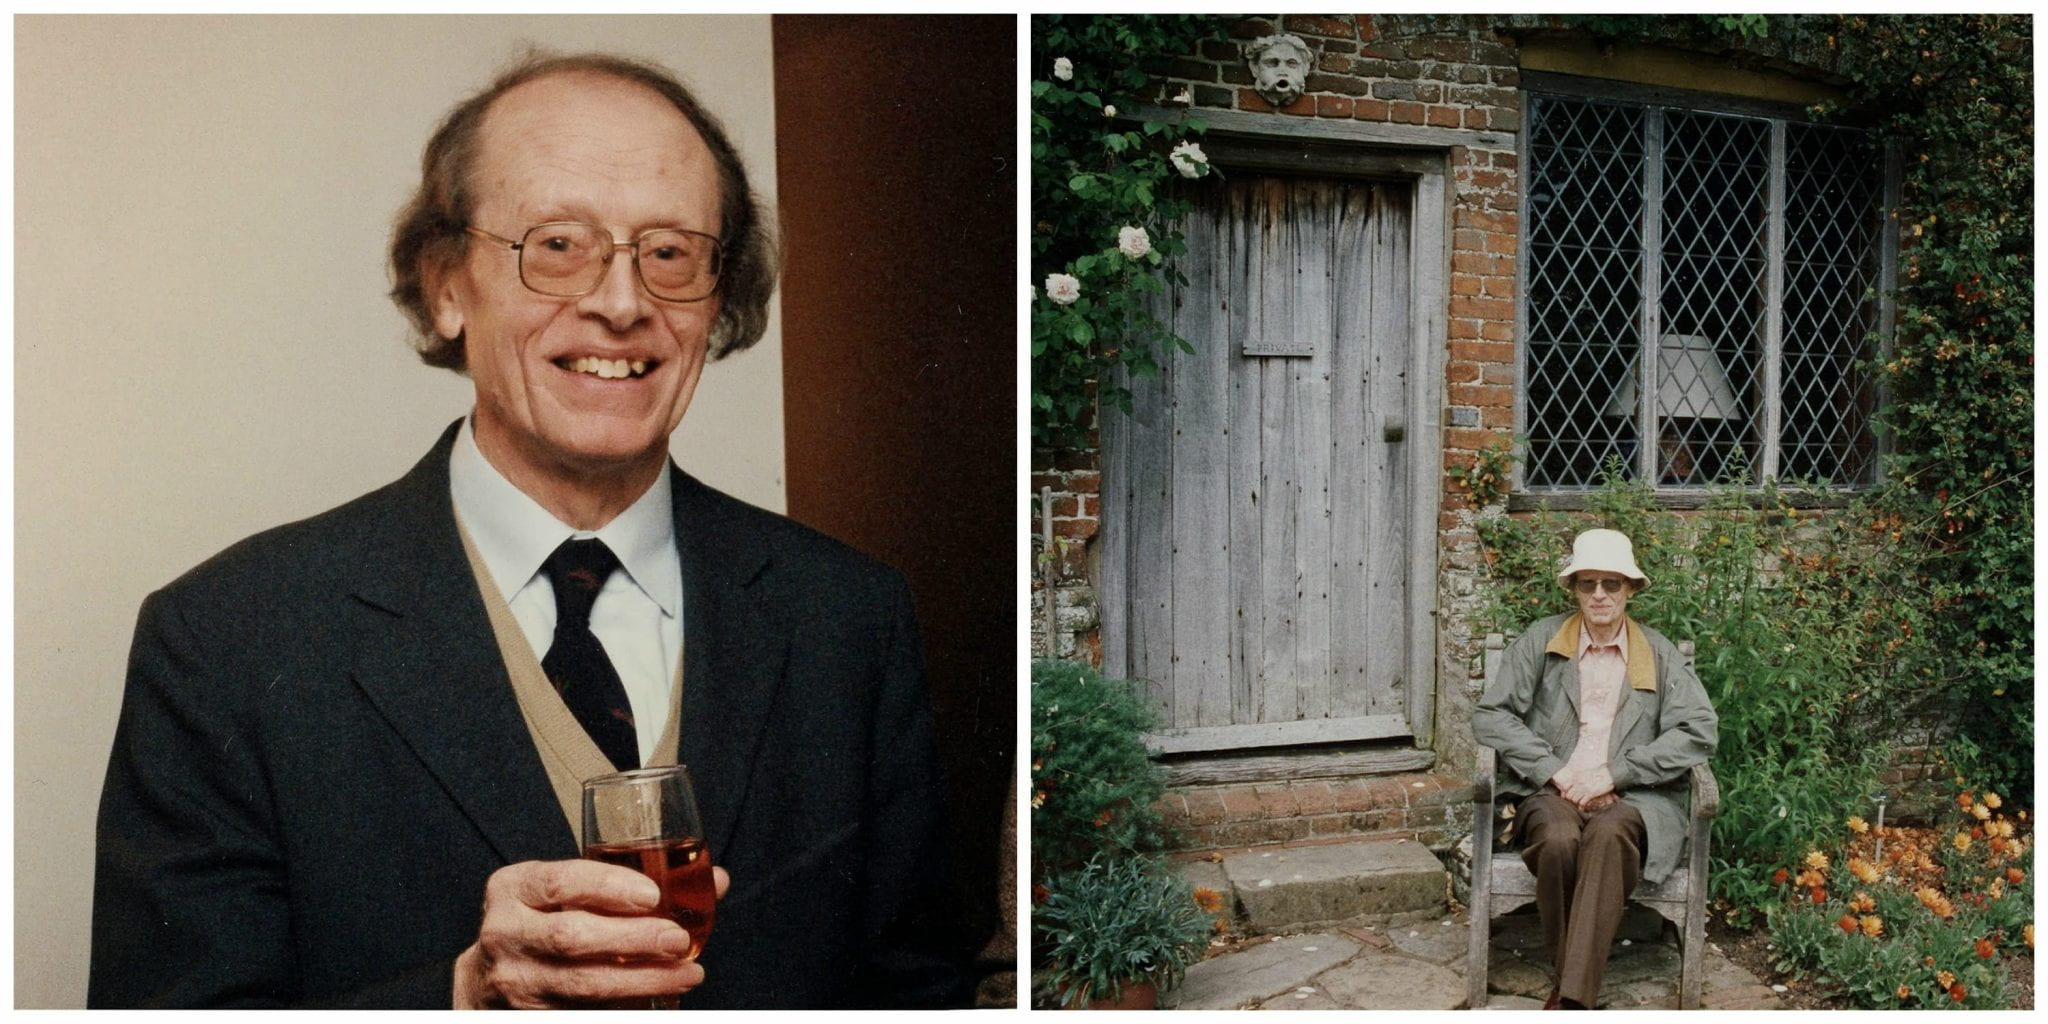 Dr. Ladd at his retirement party and in Sissinghurst, England, July 1995